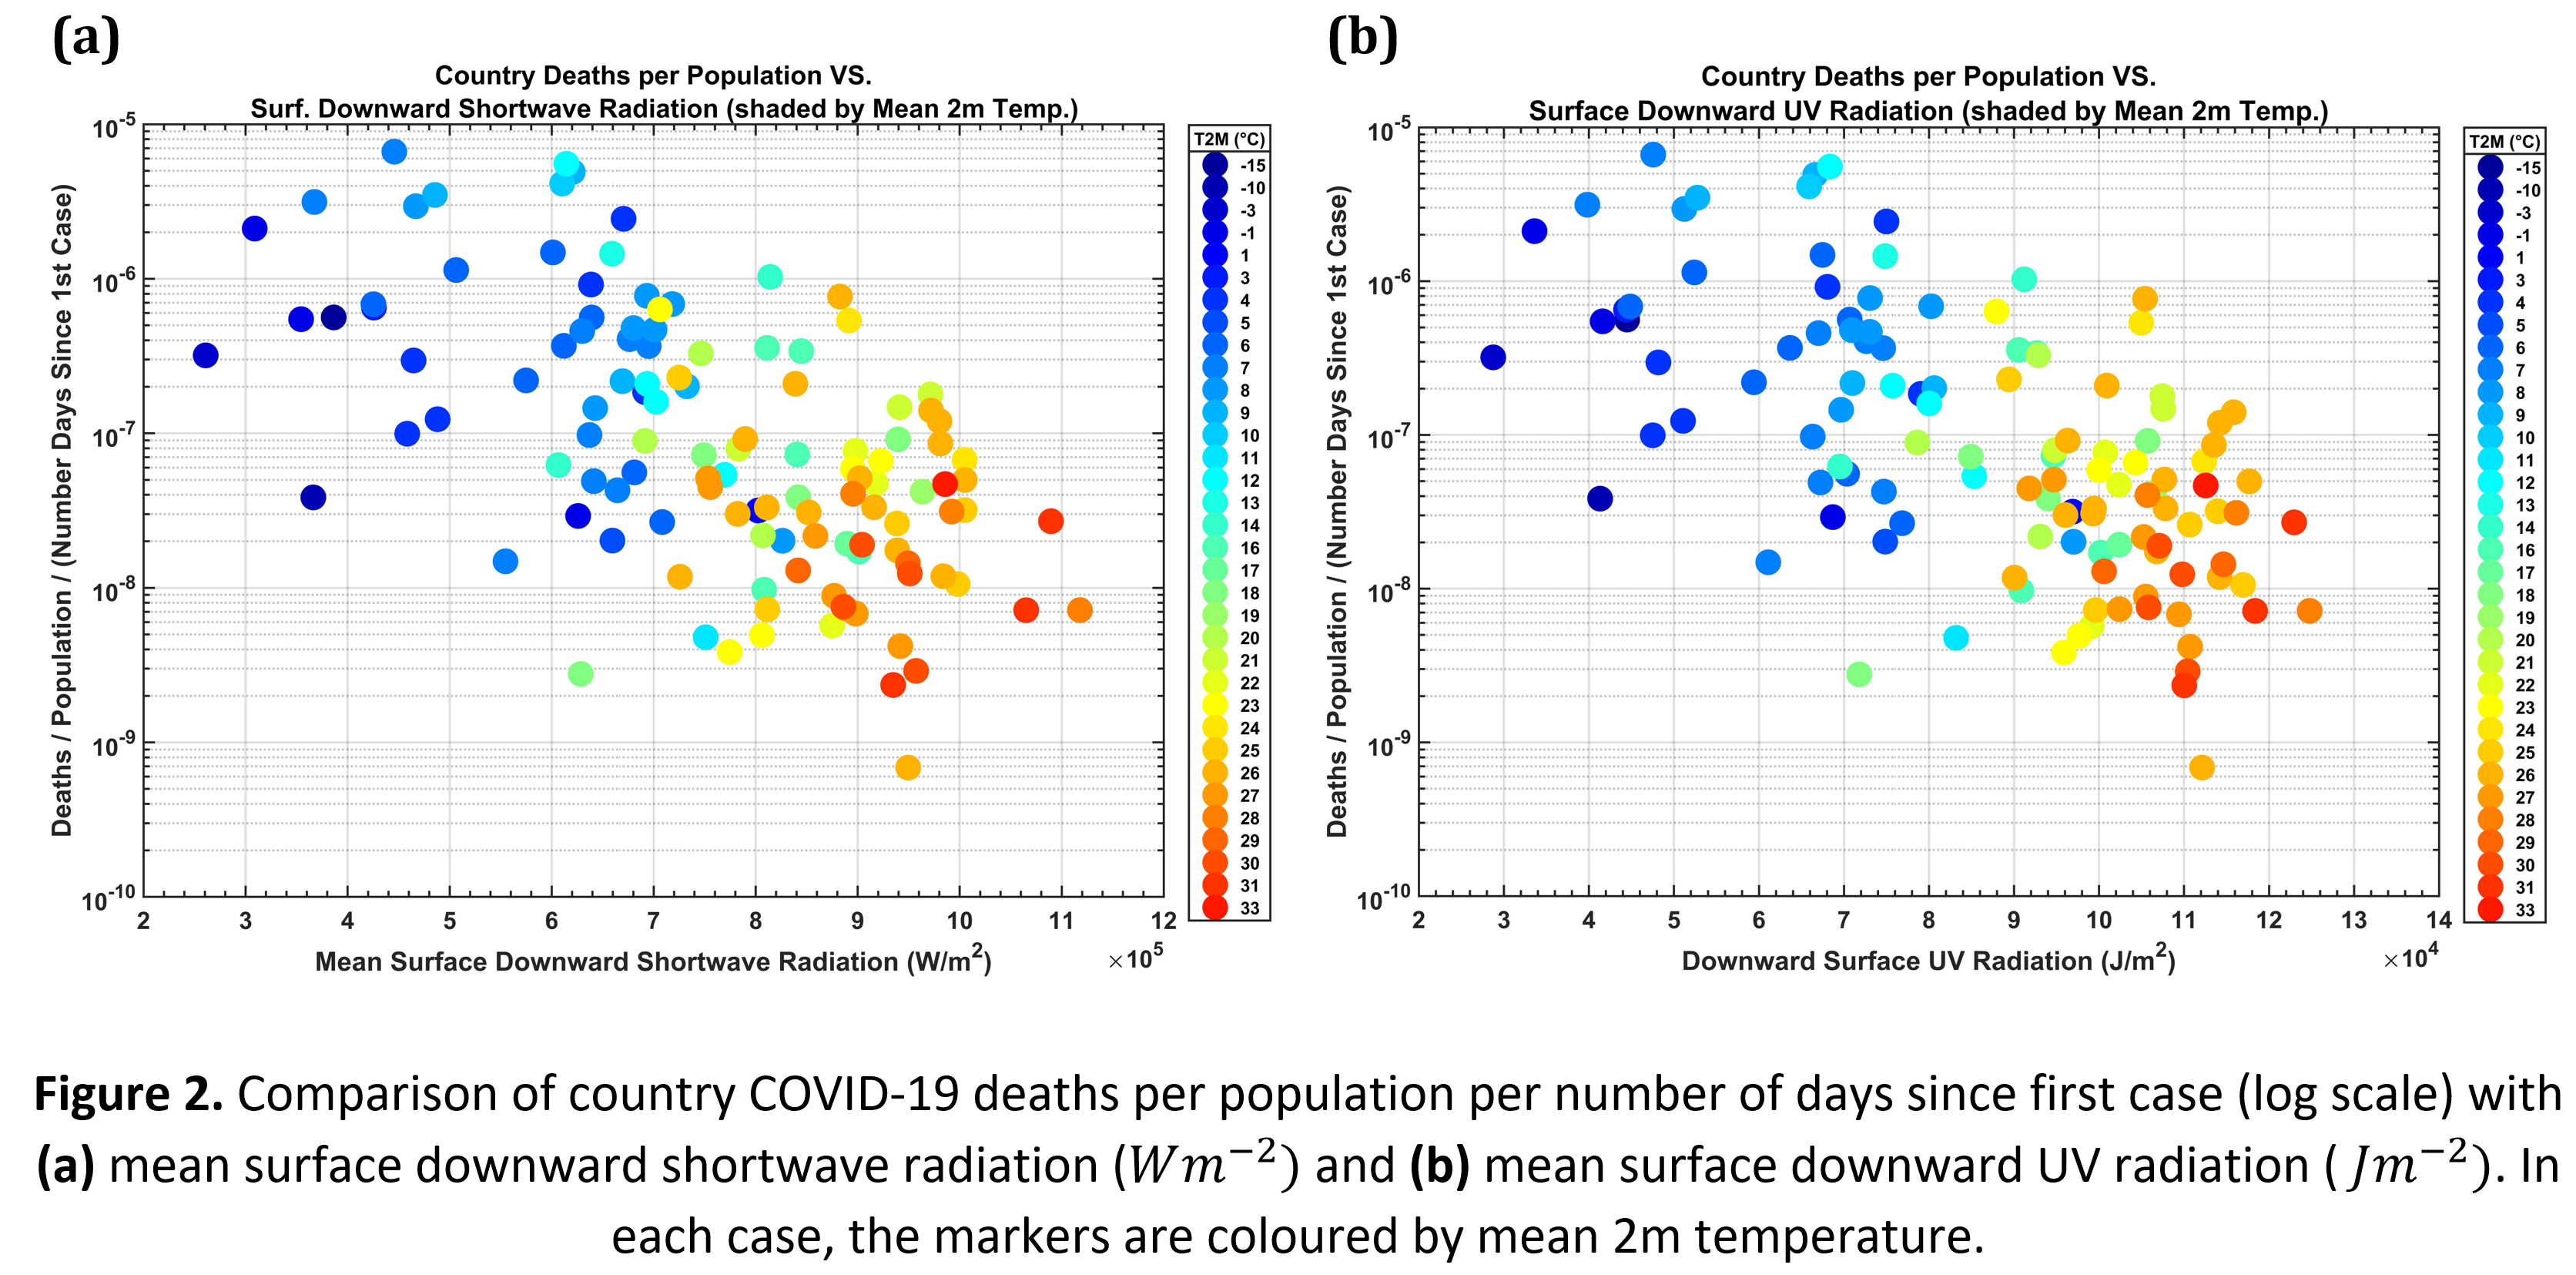 Comparison of country COVID-19 deaths per population per number of days since first case (log scale) with (a) mean surface downward shortwave radiation (Wm^(-2)) and (b) mean surface downward UV radiation ( Jm^(-2)). In each case, the markers are coloured by mean 2m temperature.